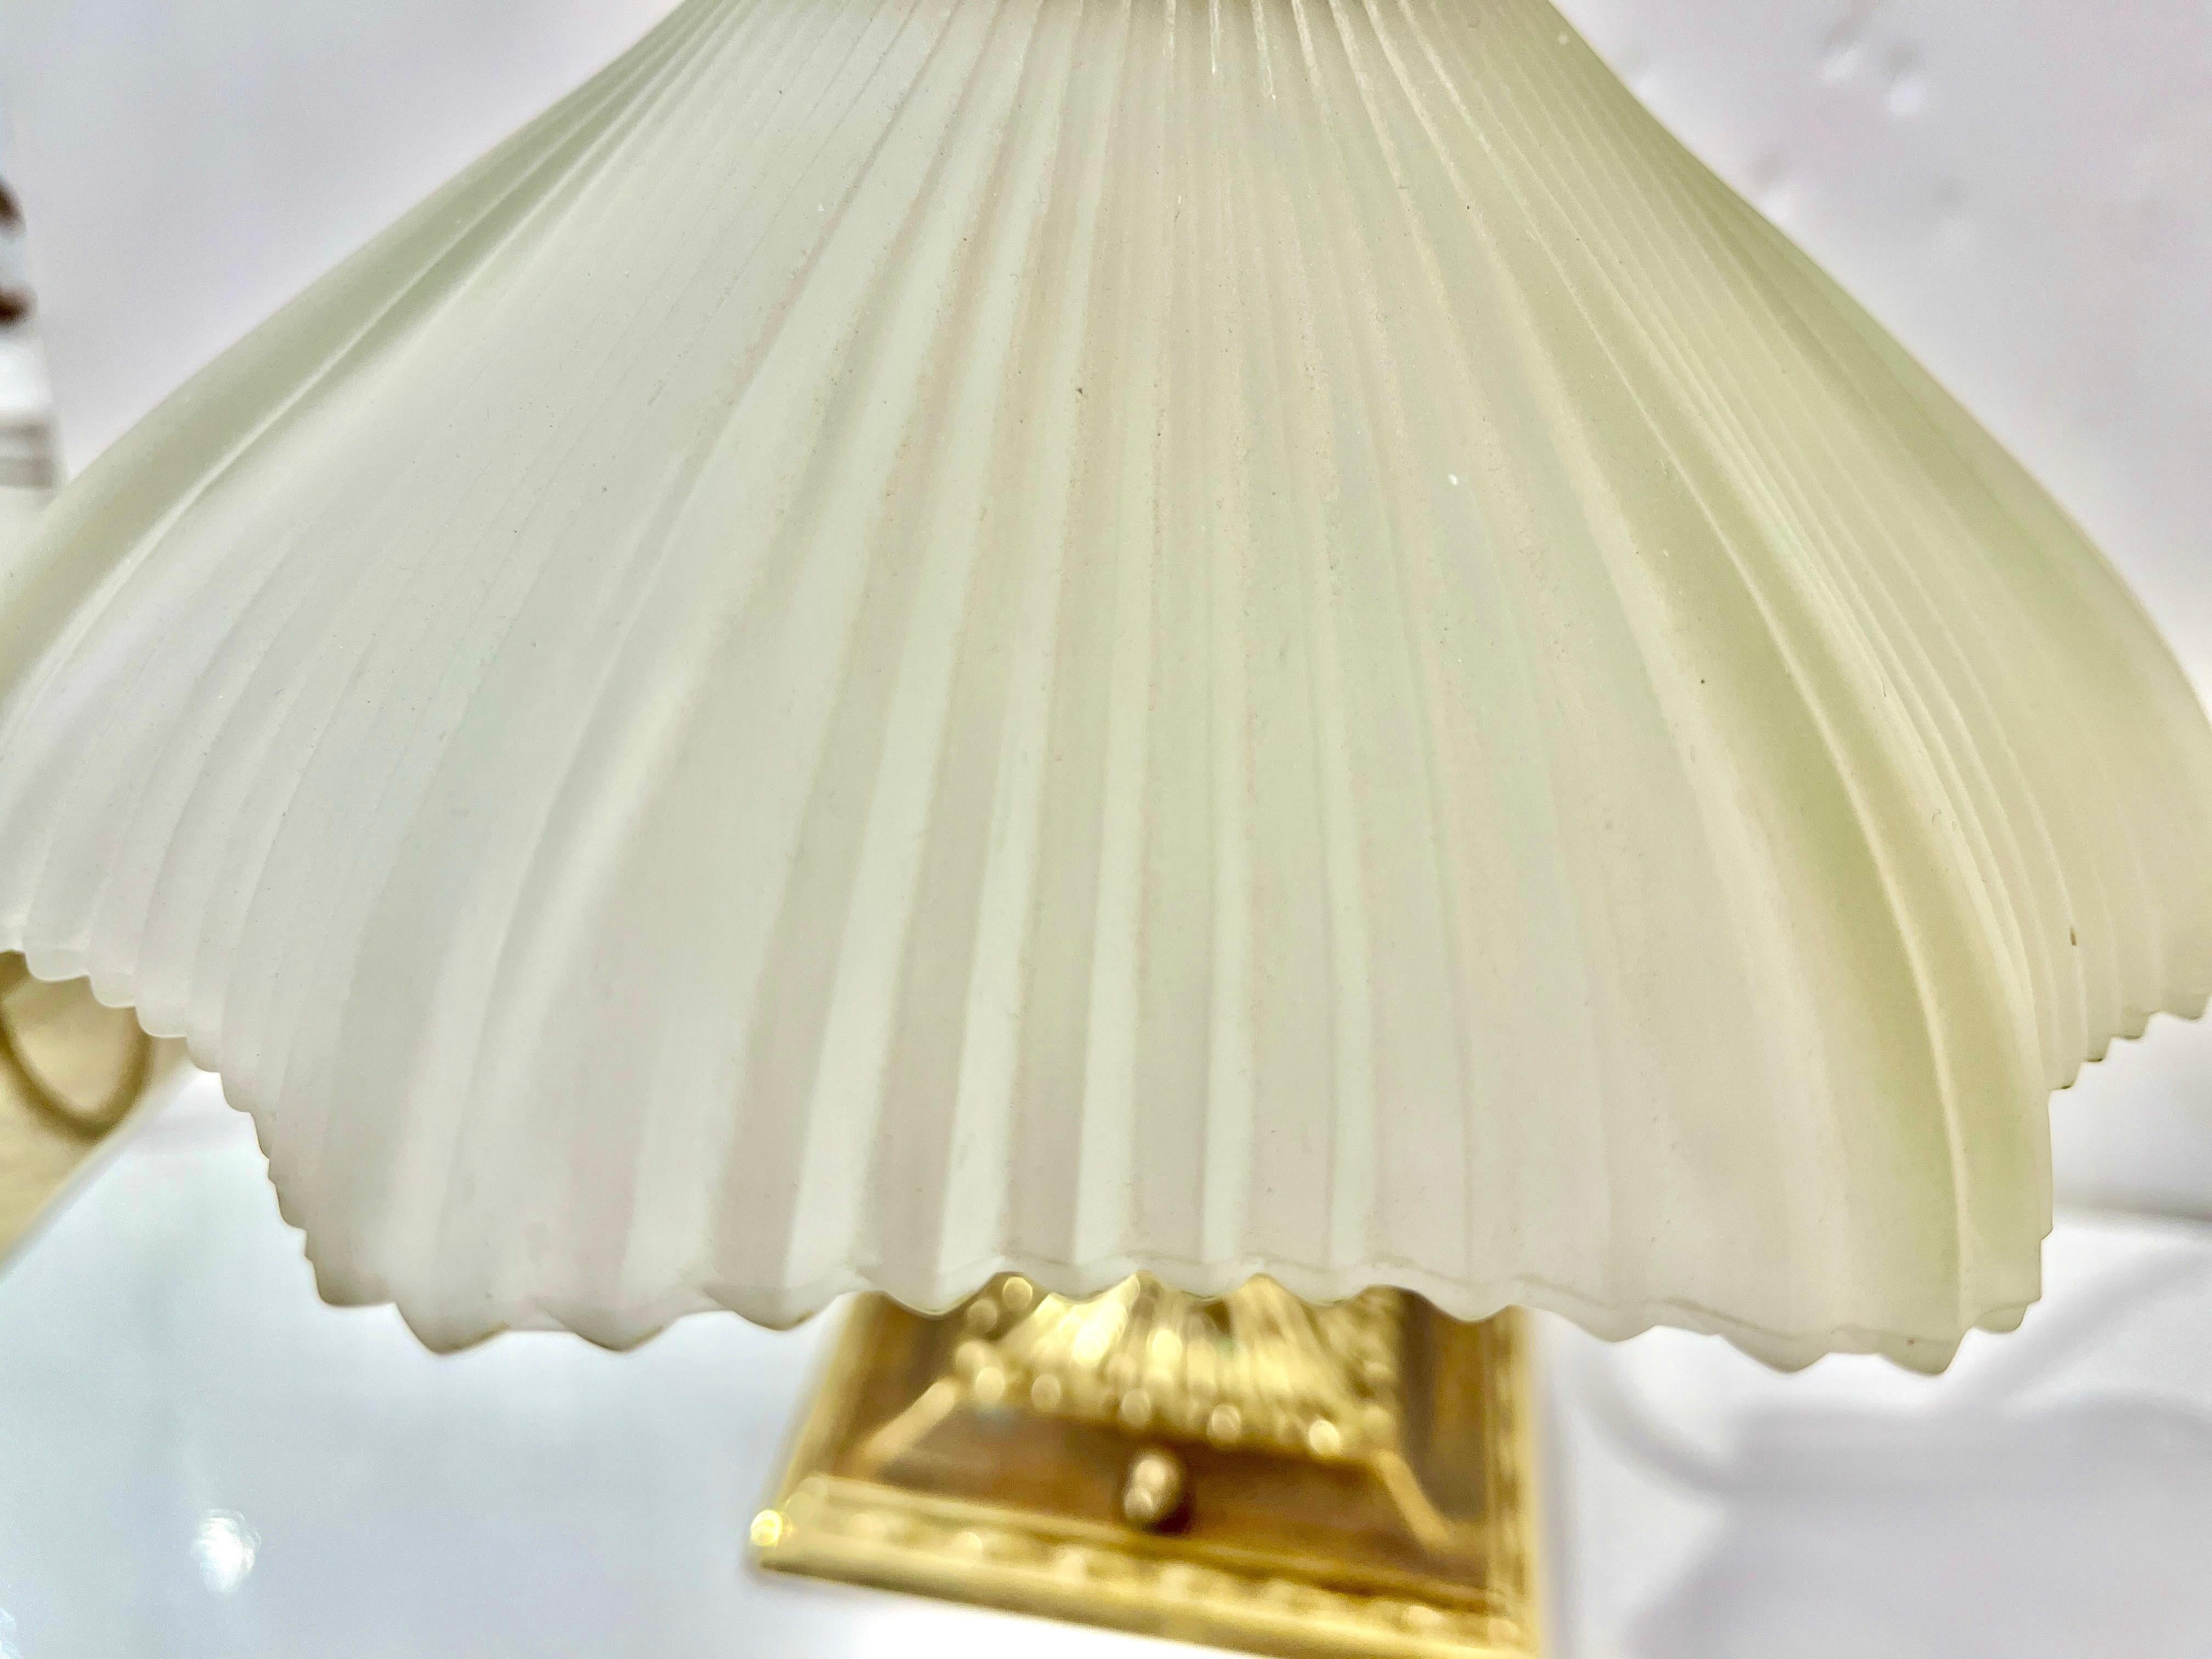 1950s American Art Deco Style Brass Table/Desk Lamp with Satin White Glass Shade For Sale 5